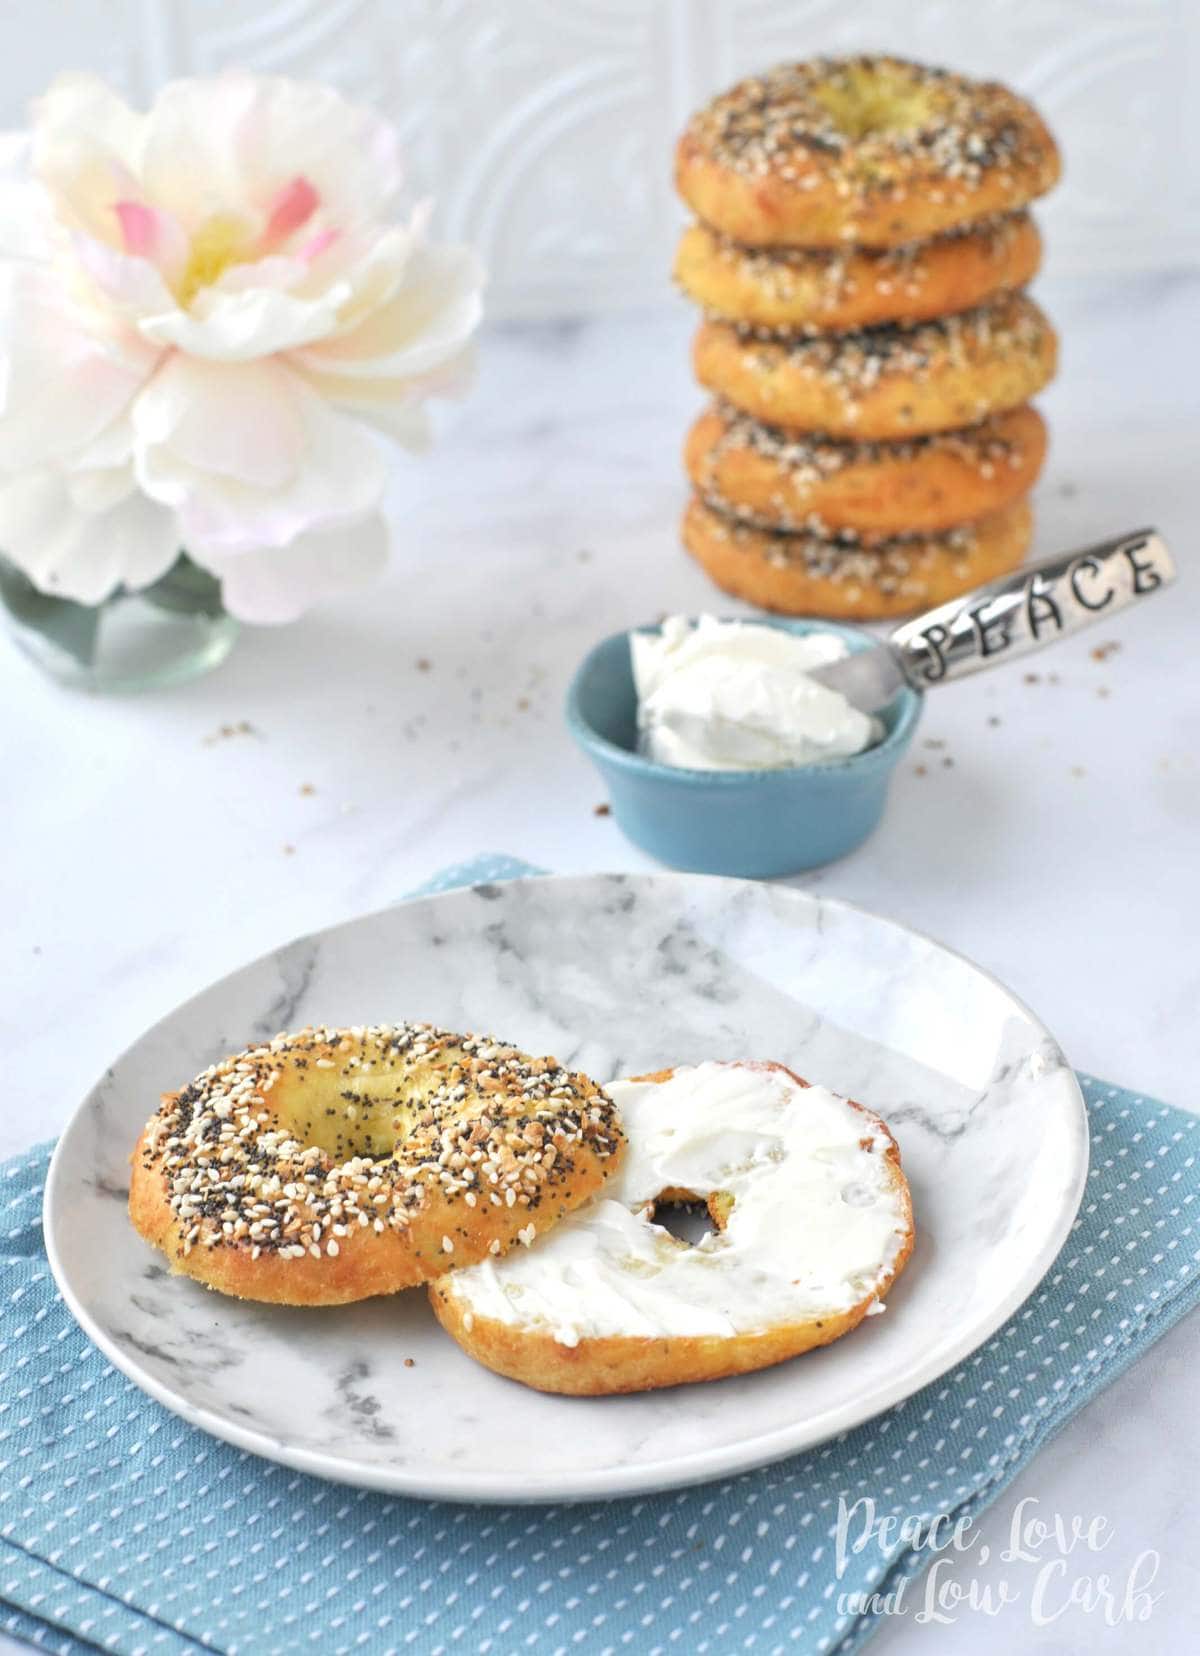 A low carb everything bagel with cream cheese on a marble plate. Behind it is a dish of cream cheese and a stack of bagels